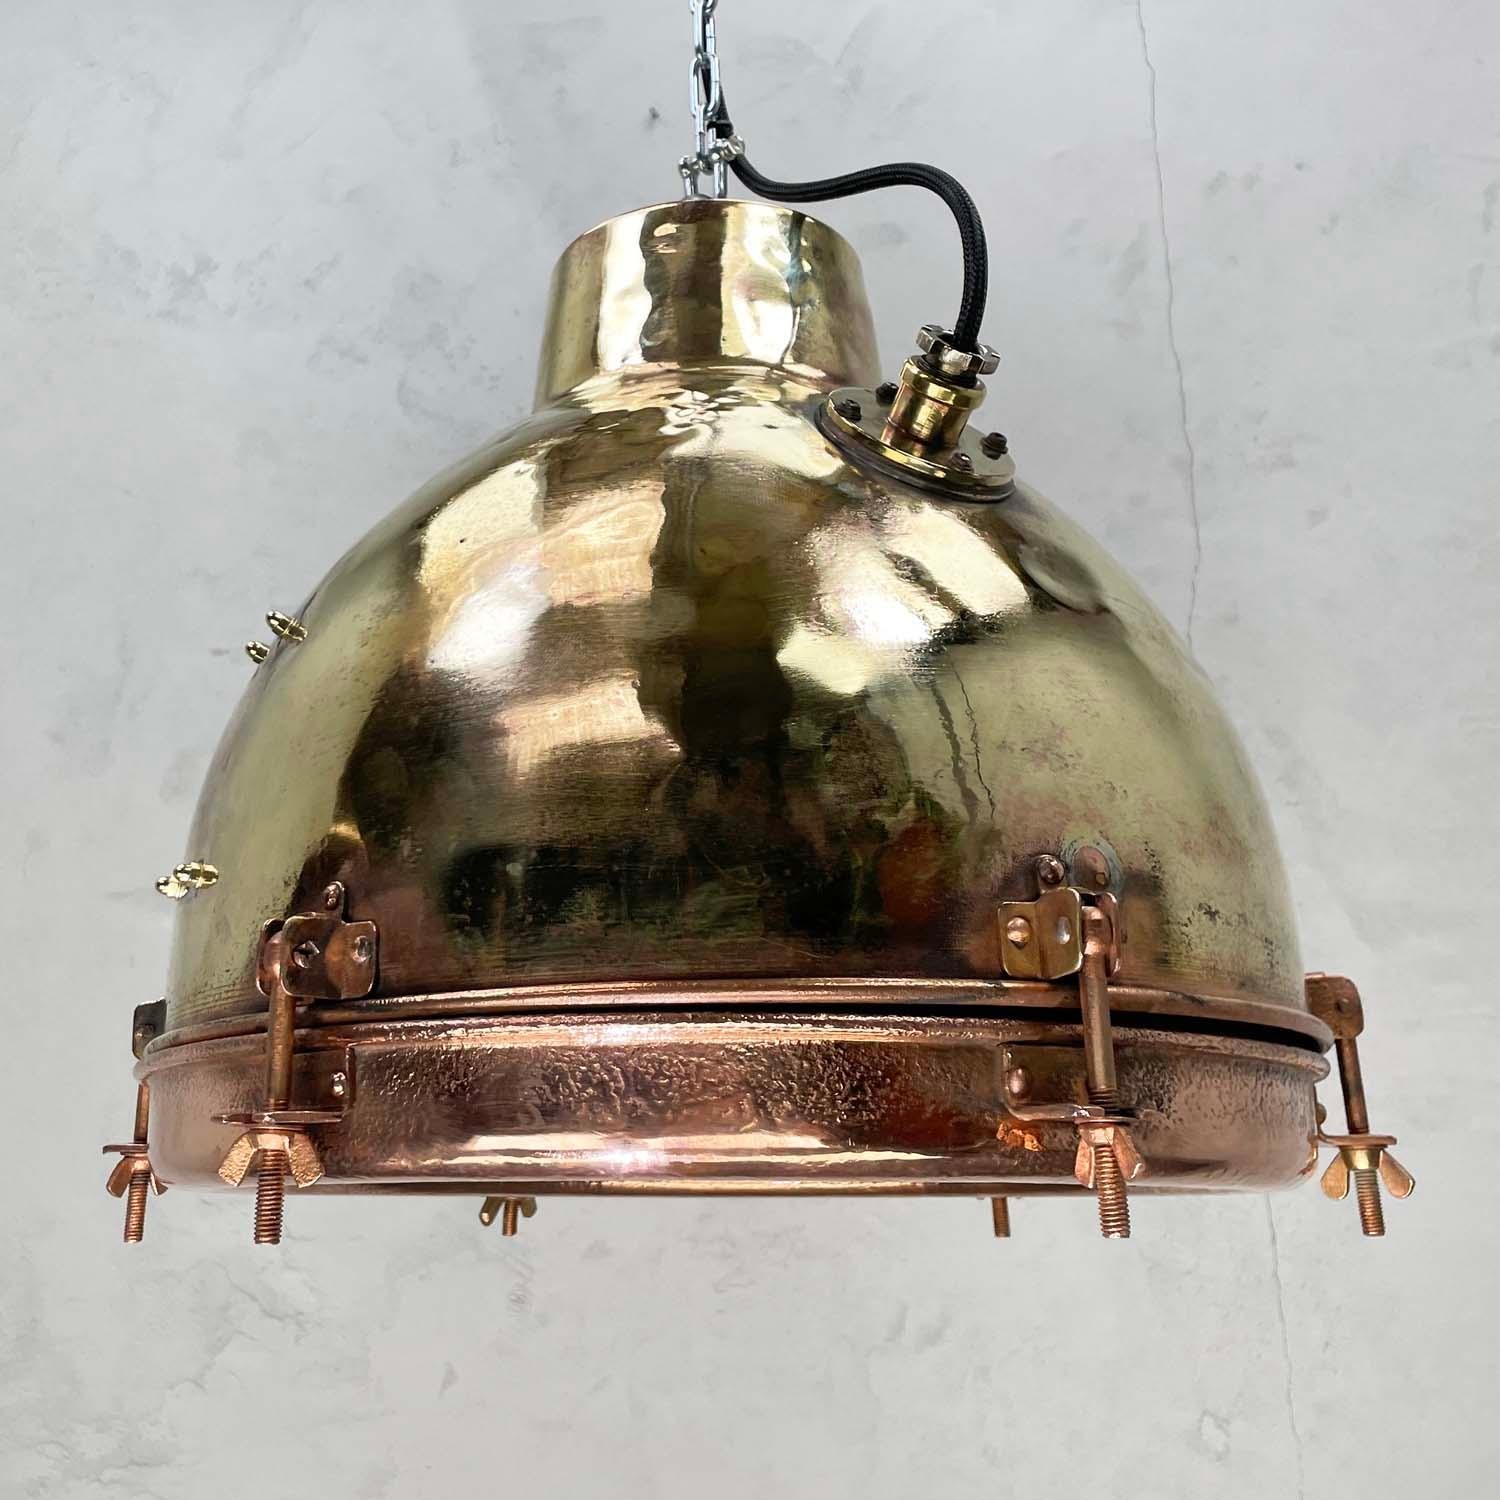 1960s Japanese Industrial Brass, Copper and Glass Dome Pendant Light In Good Condition For Sale In Leicester, Leicestershire